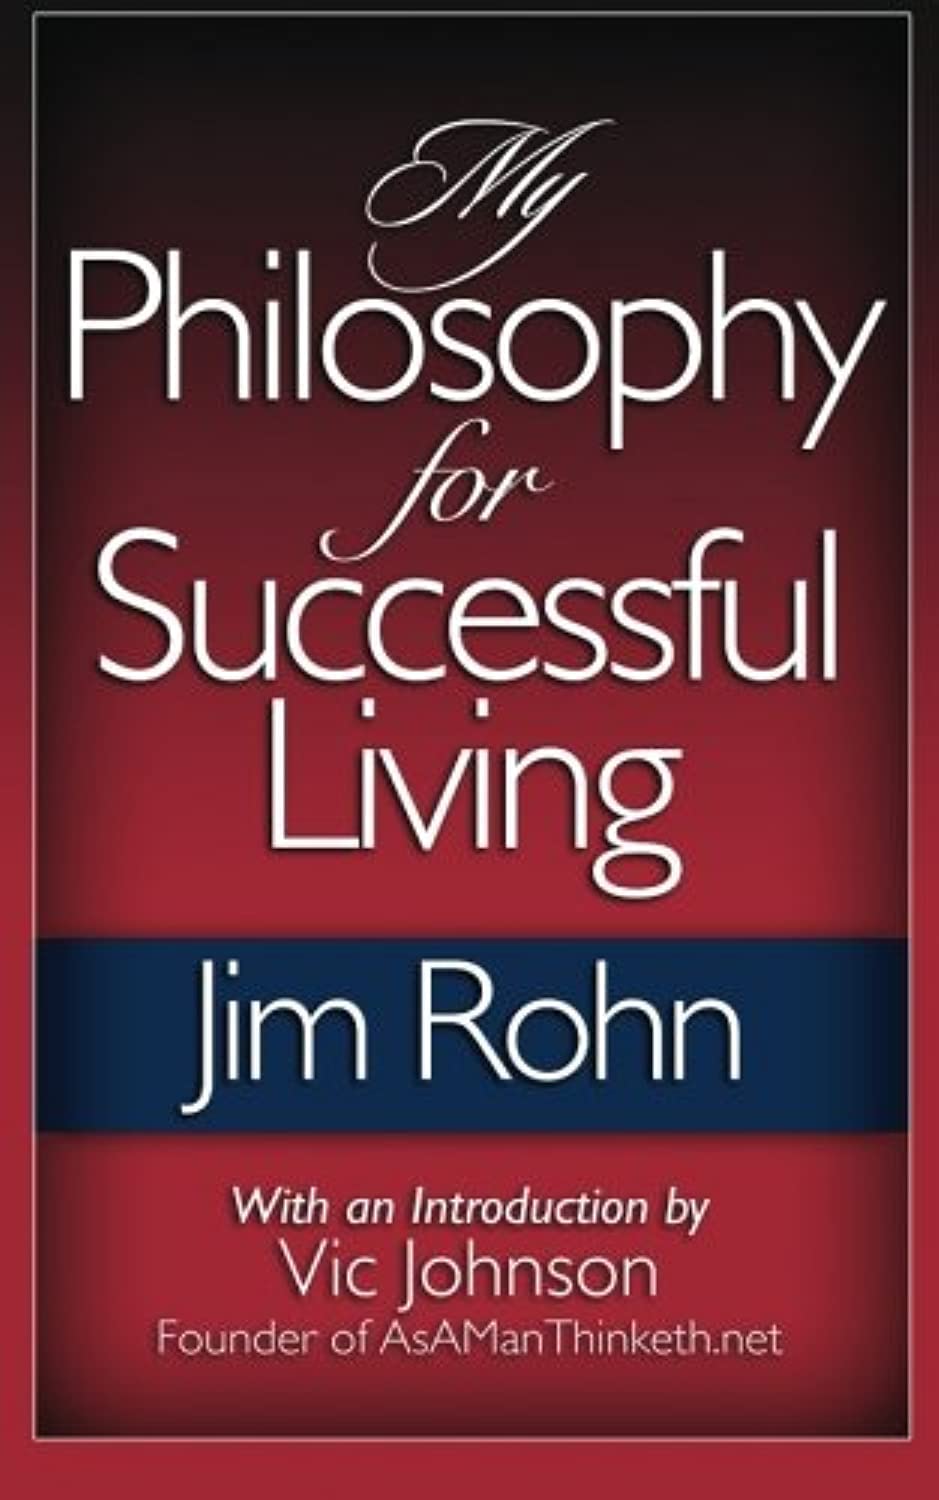 My Philosophy for Successful Living by Jim Rohn